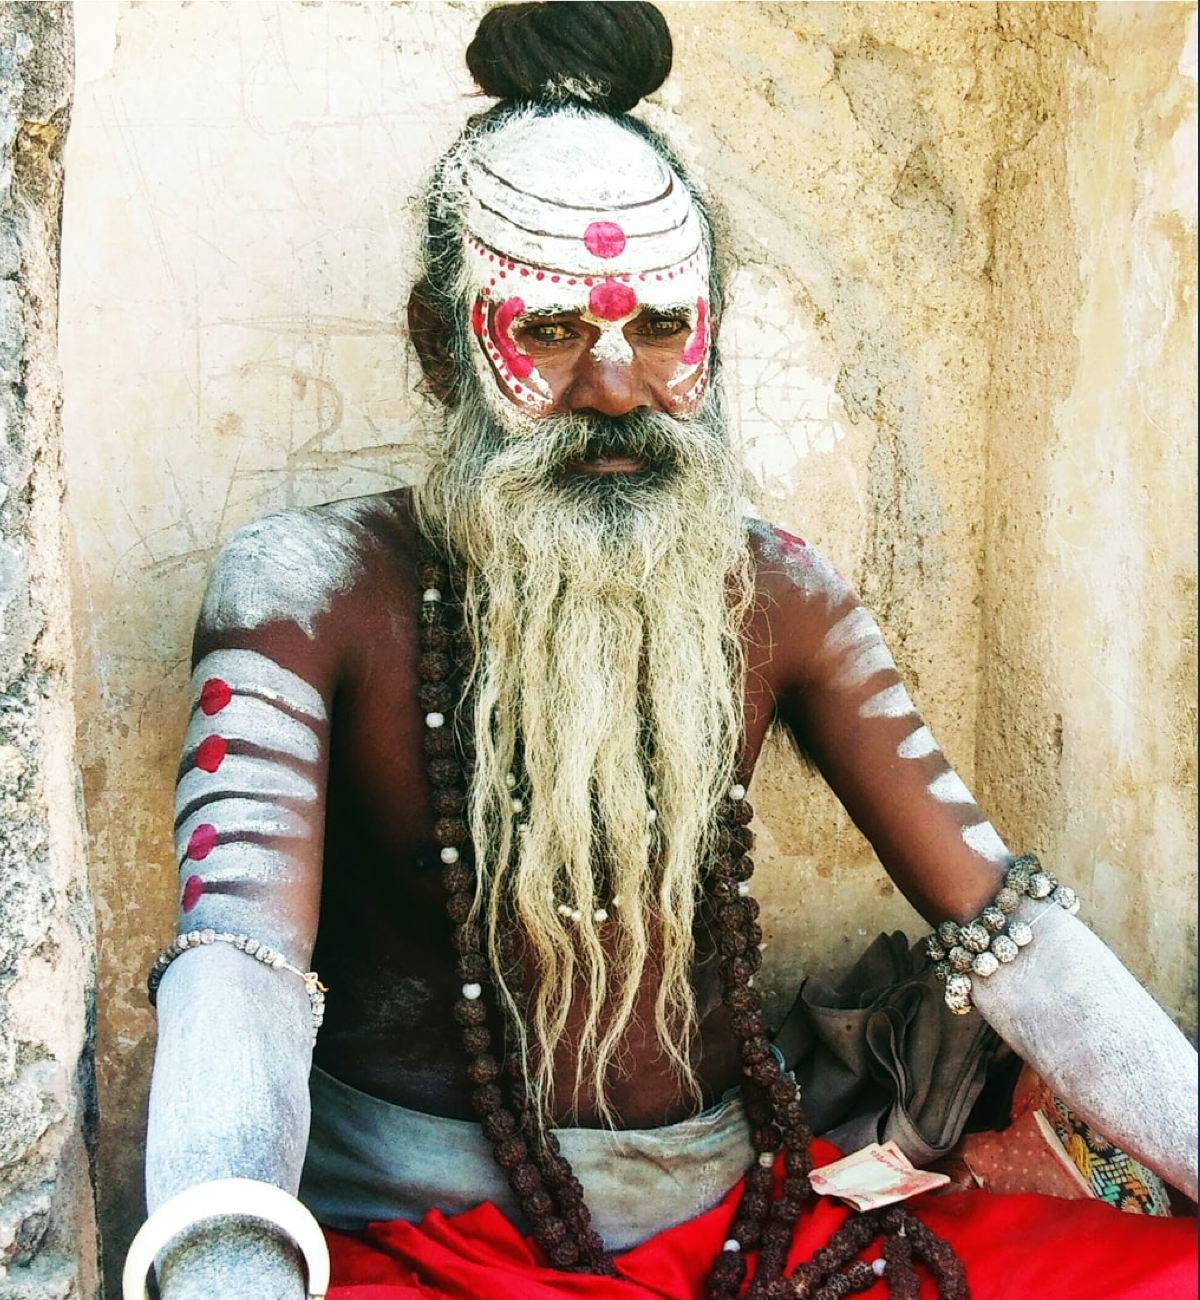 Man with traditional face paint.